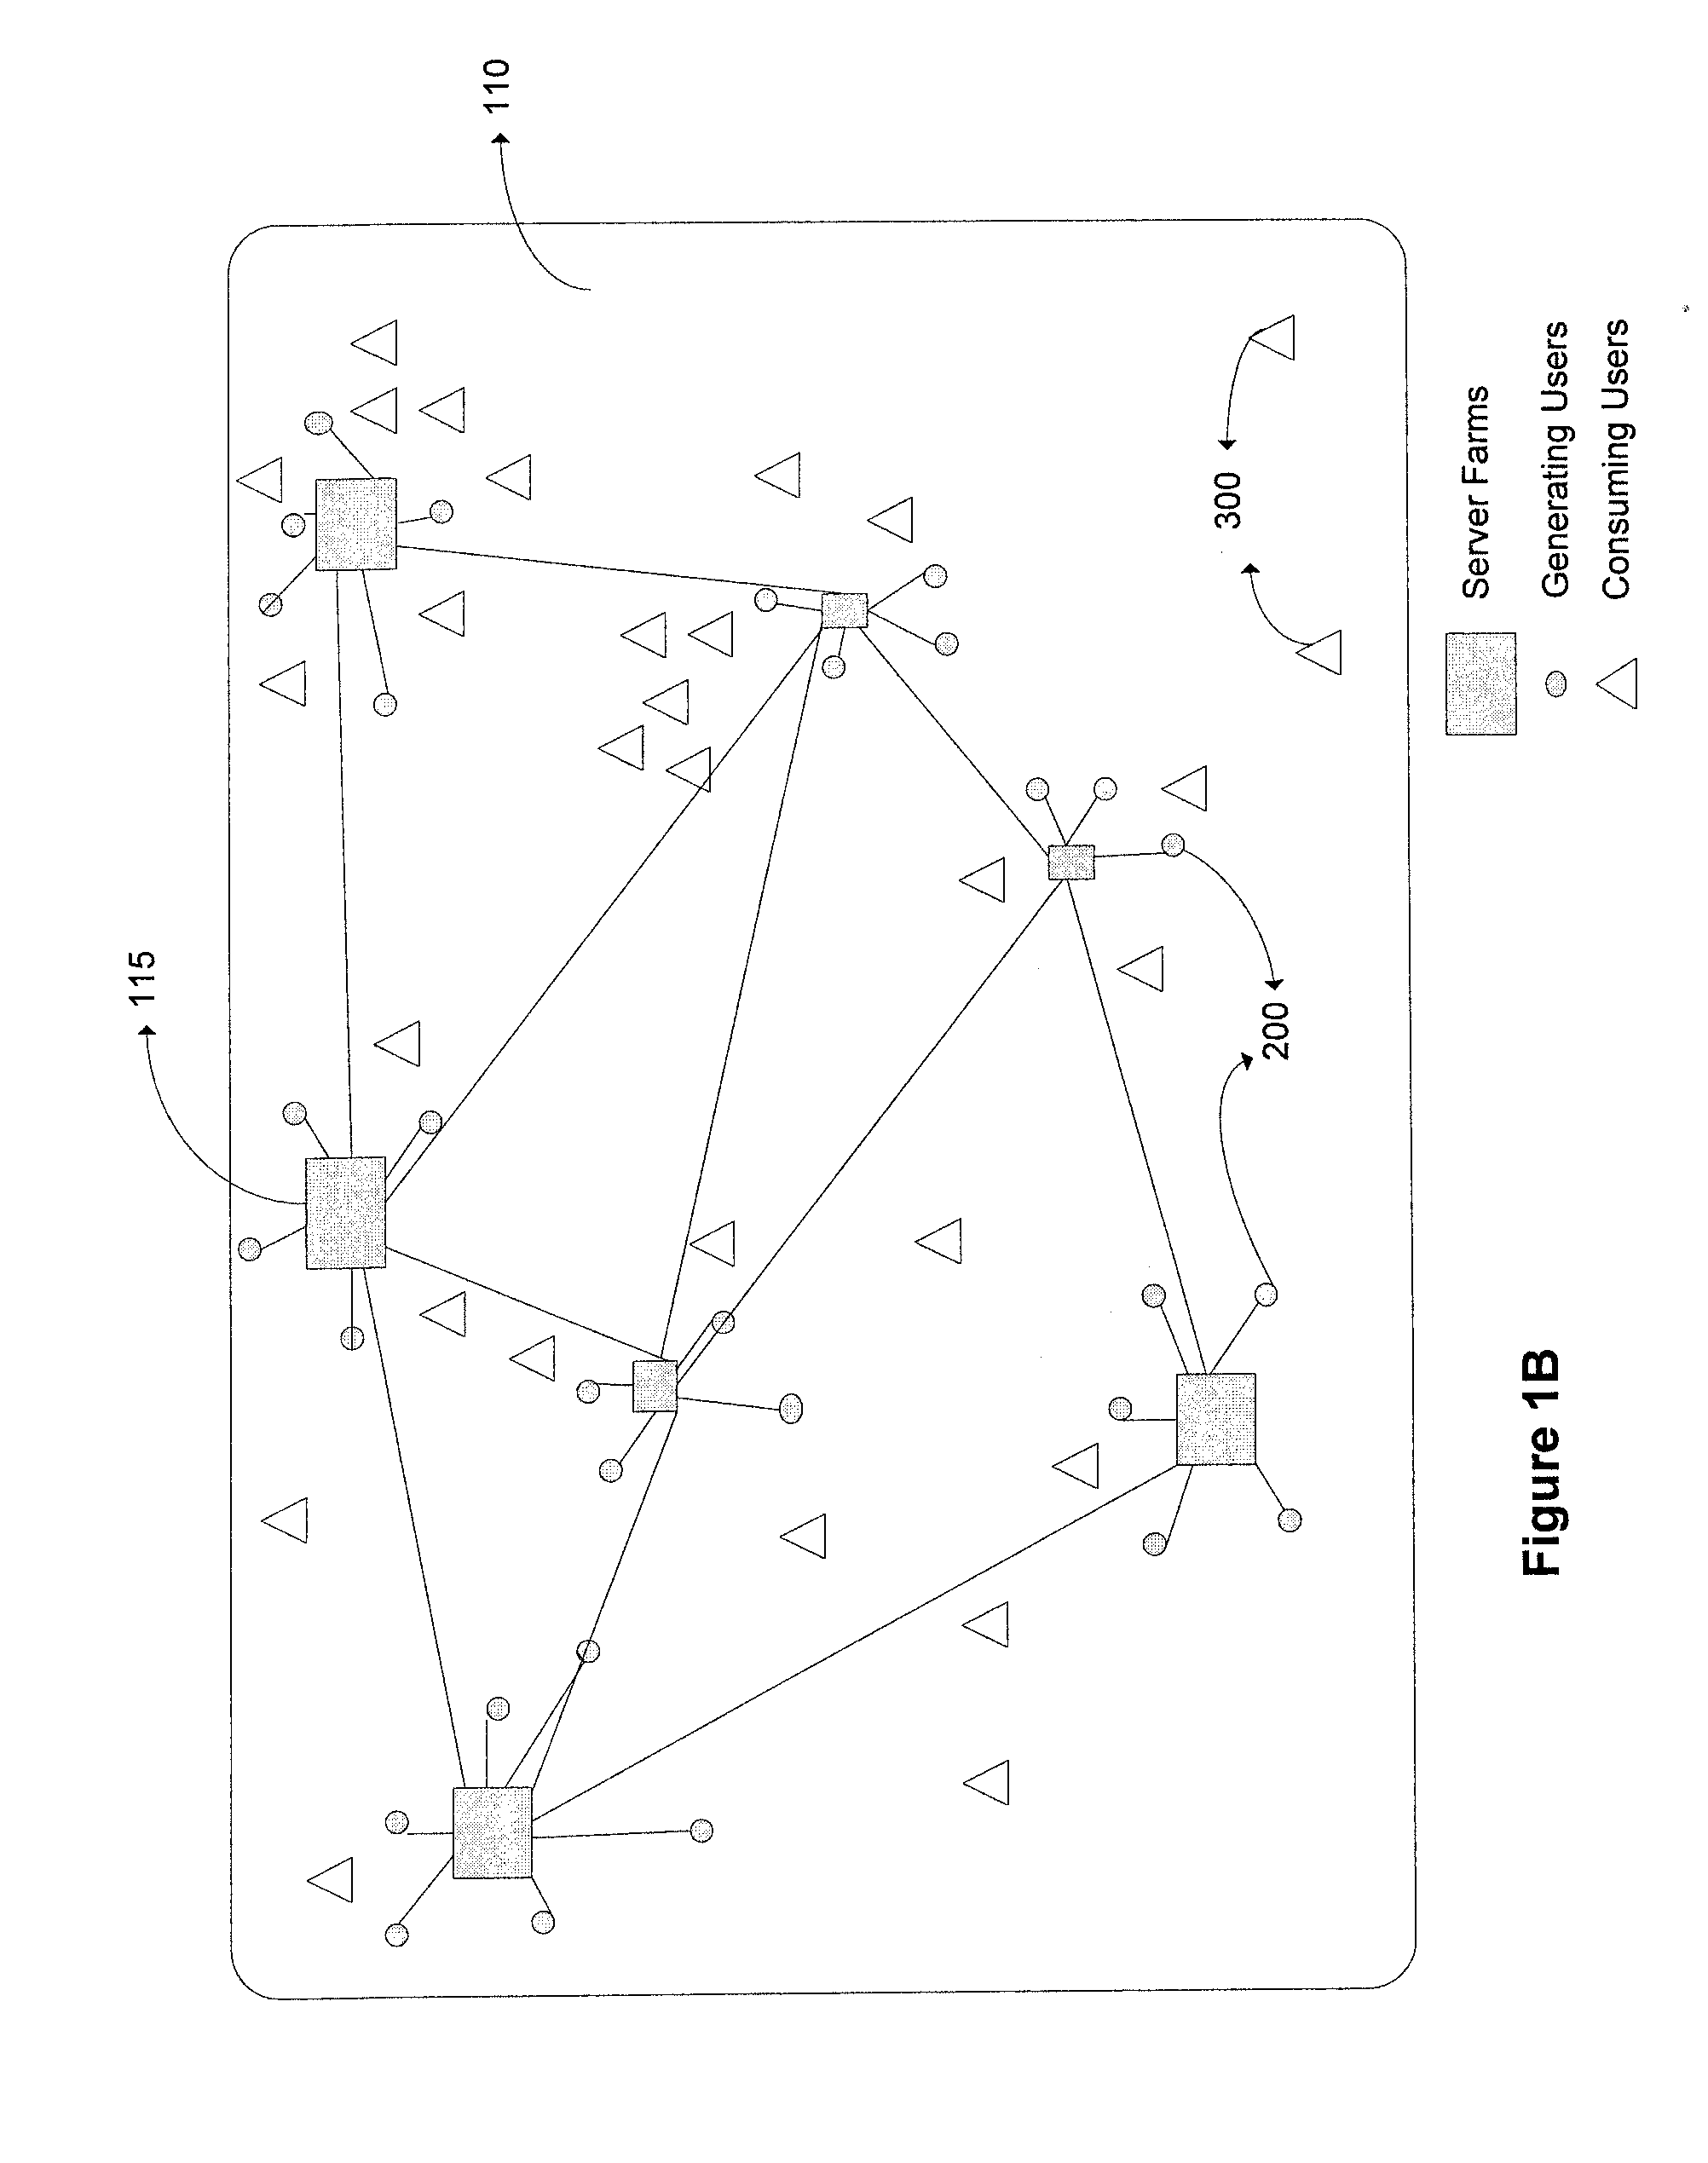 Distributed live multimedia switching mechanism and network